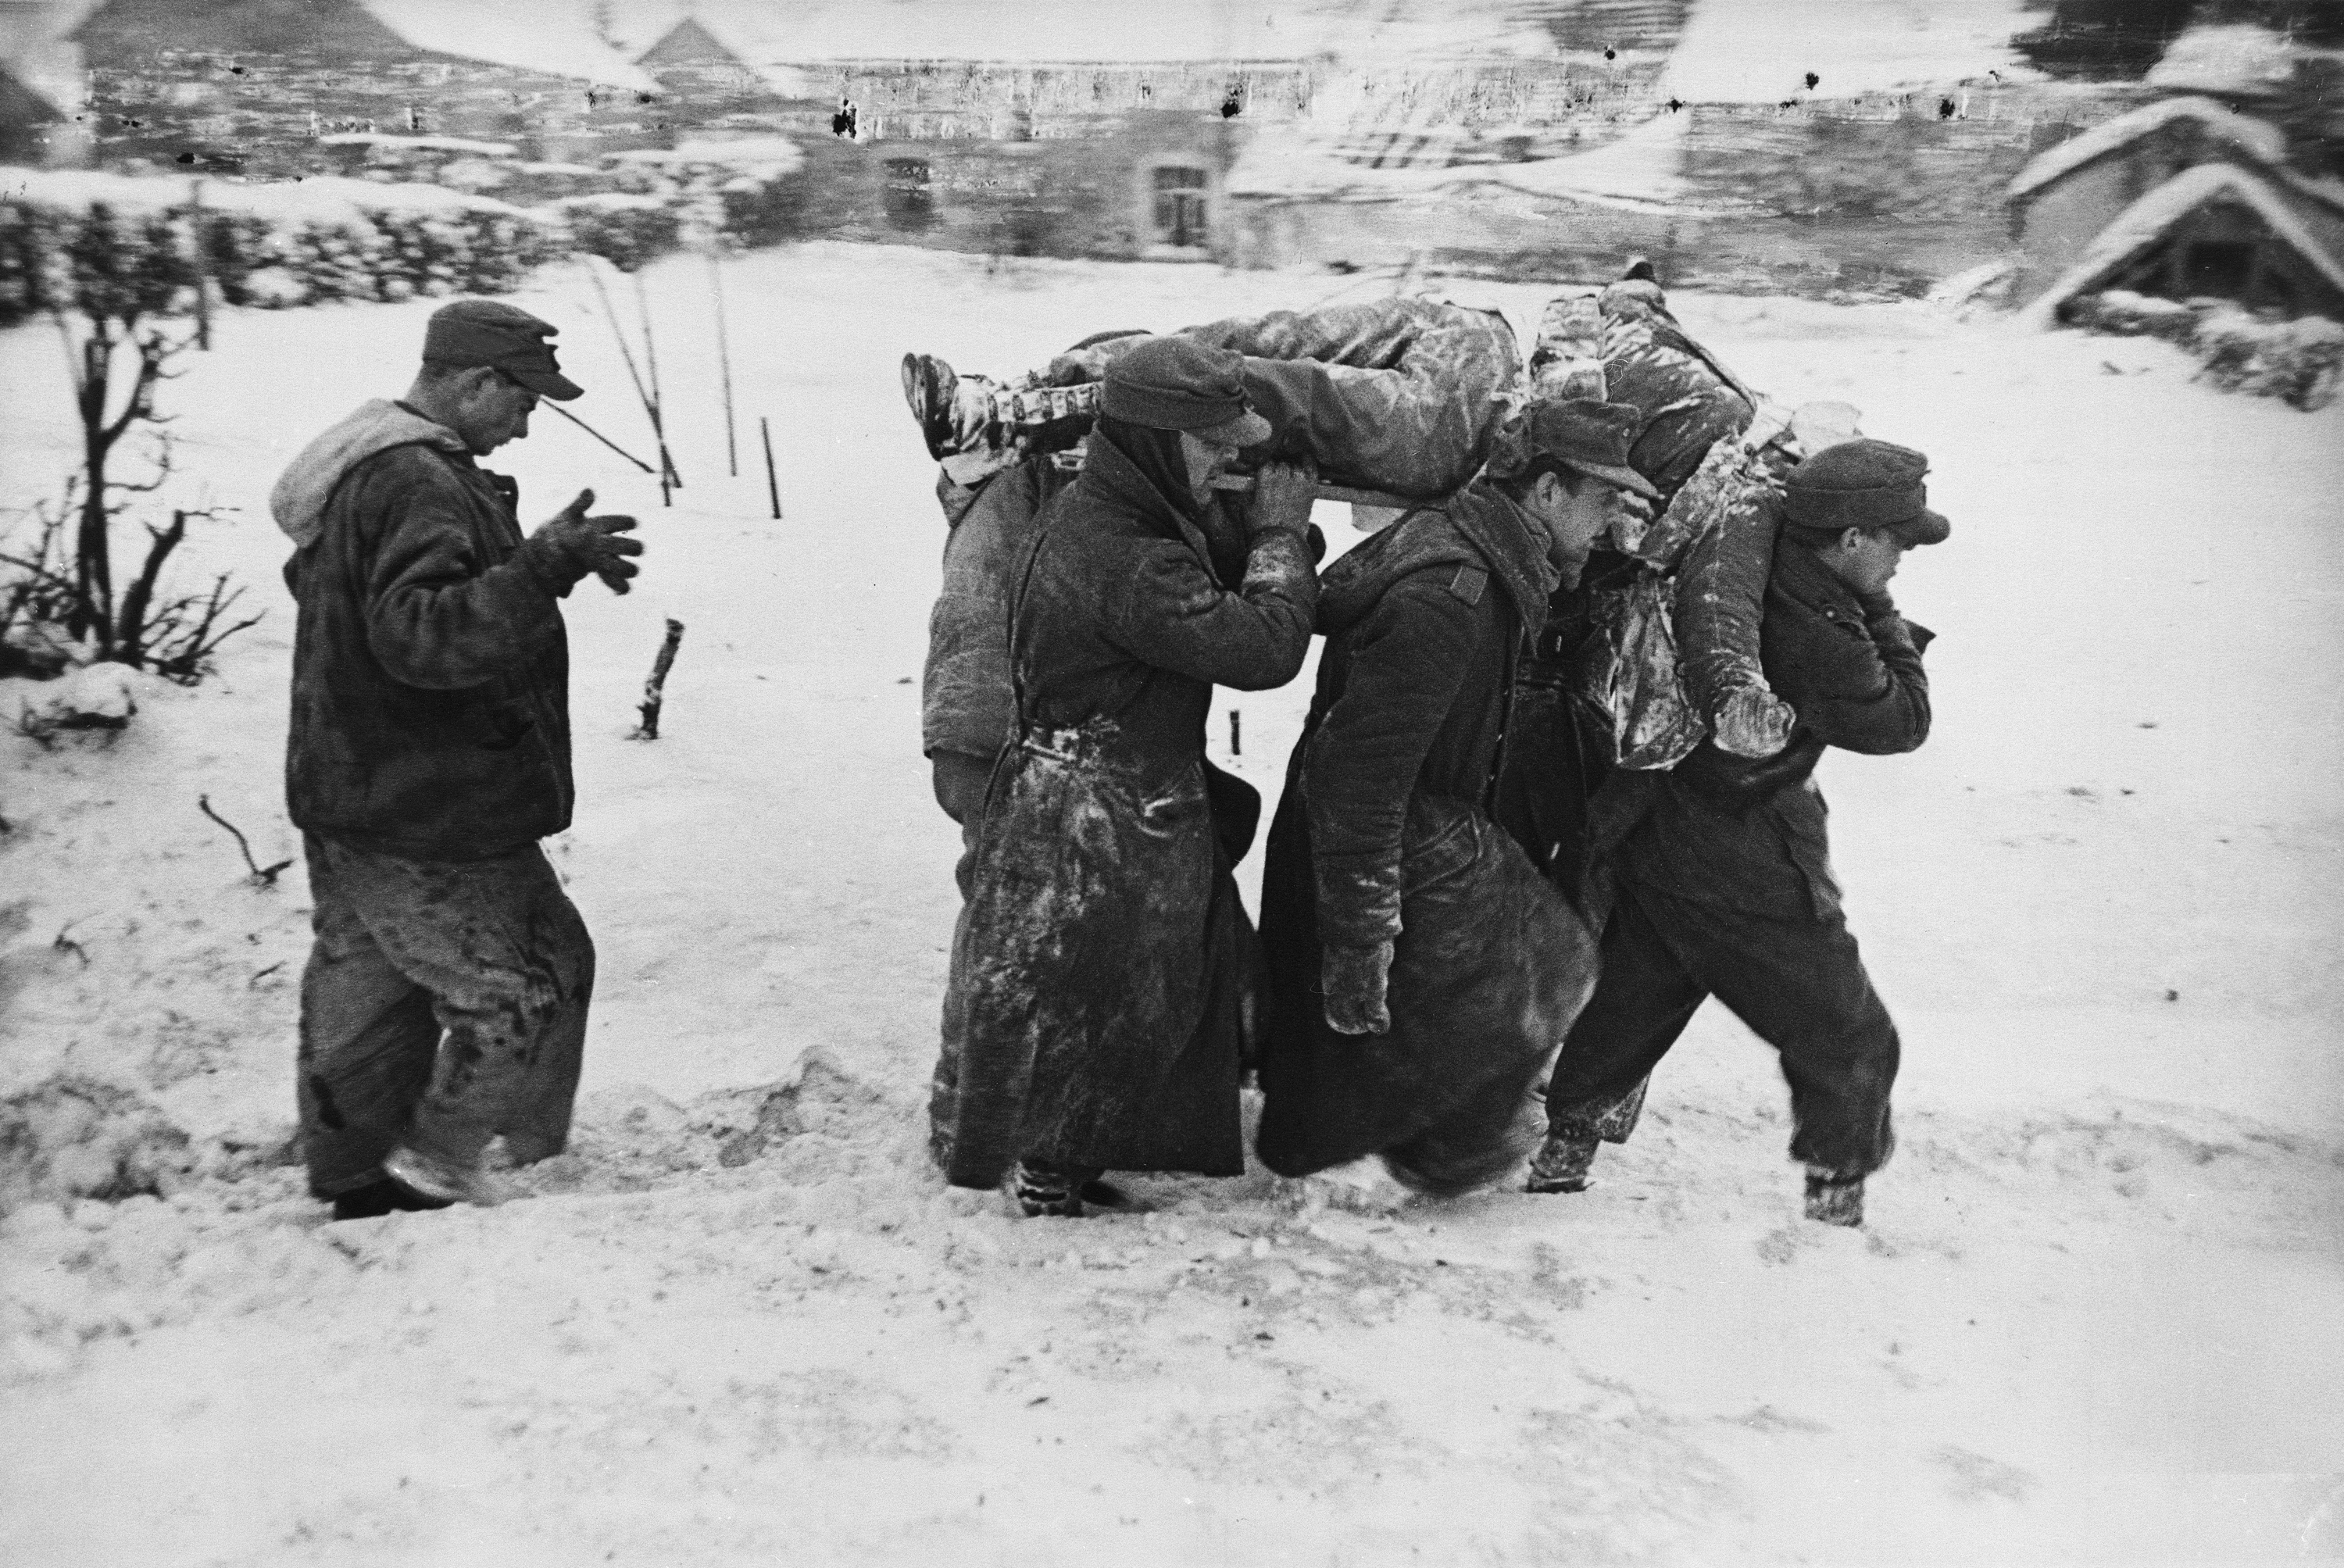 German POWs carry the body of an American soldier killed in the Battle of Bulge, January 1945.